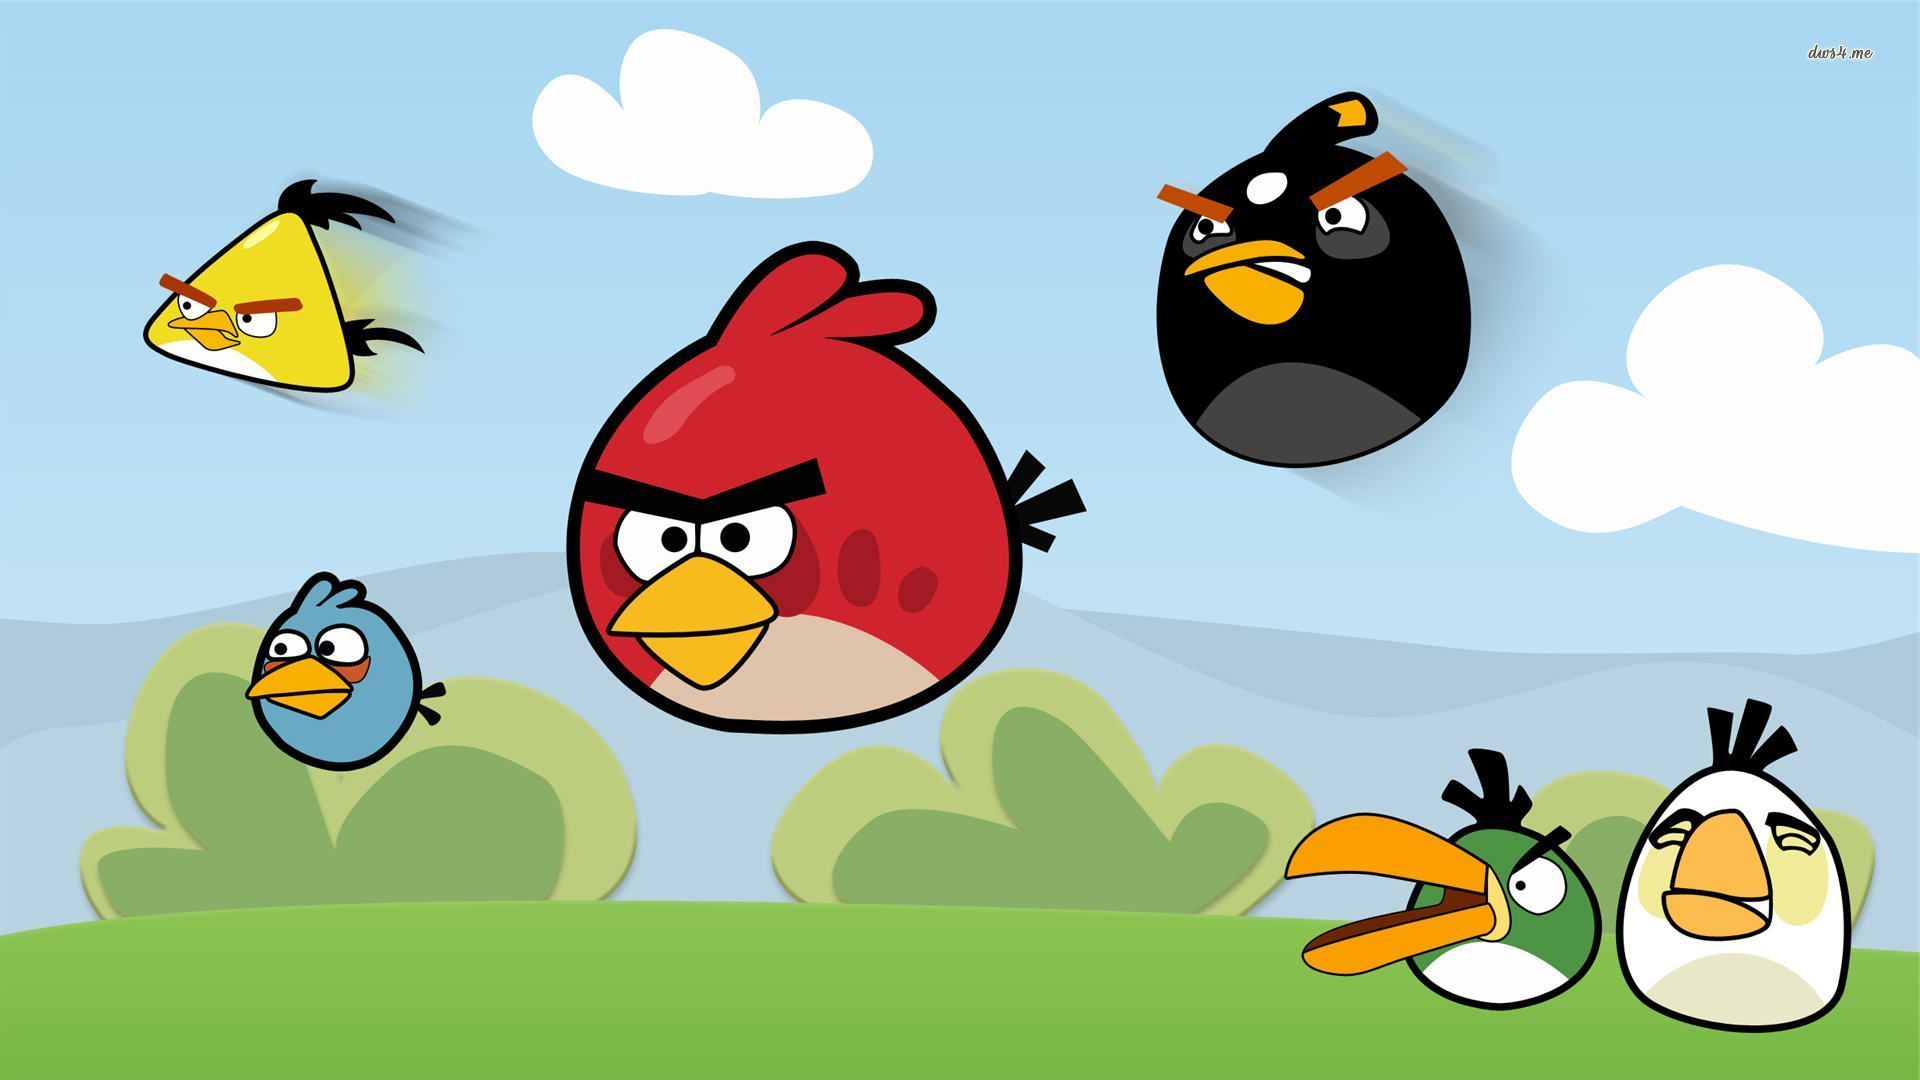 Angry Bird Game Wallpaper 24180 Hd Wallpapers in Games   Imagescicom 1920x1080